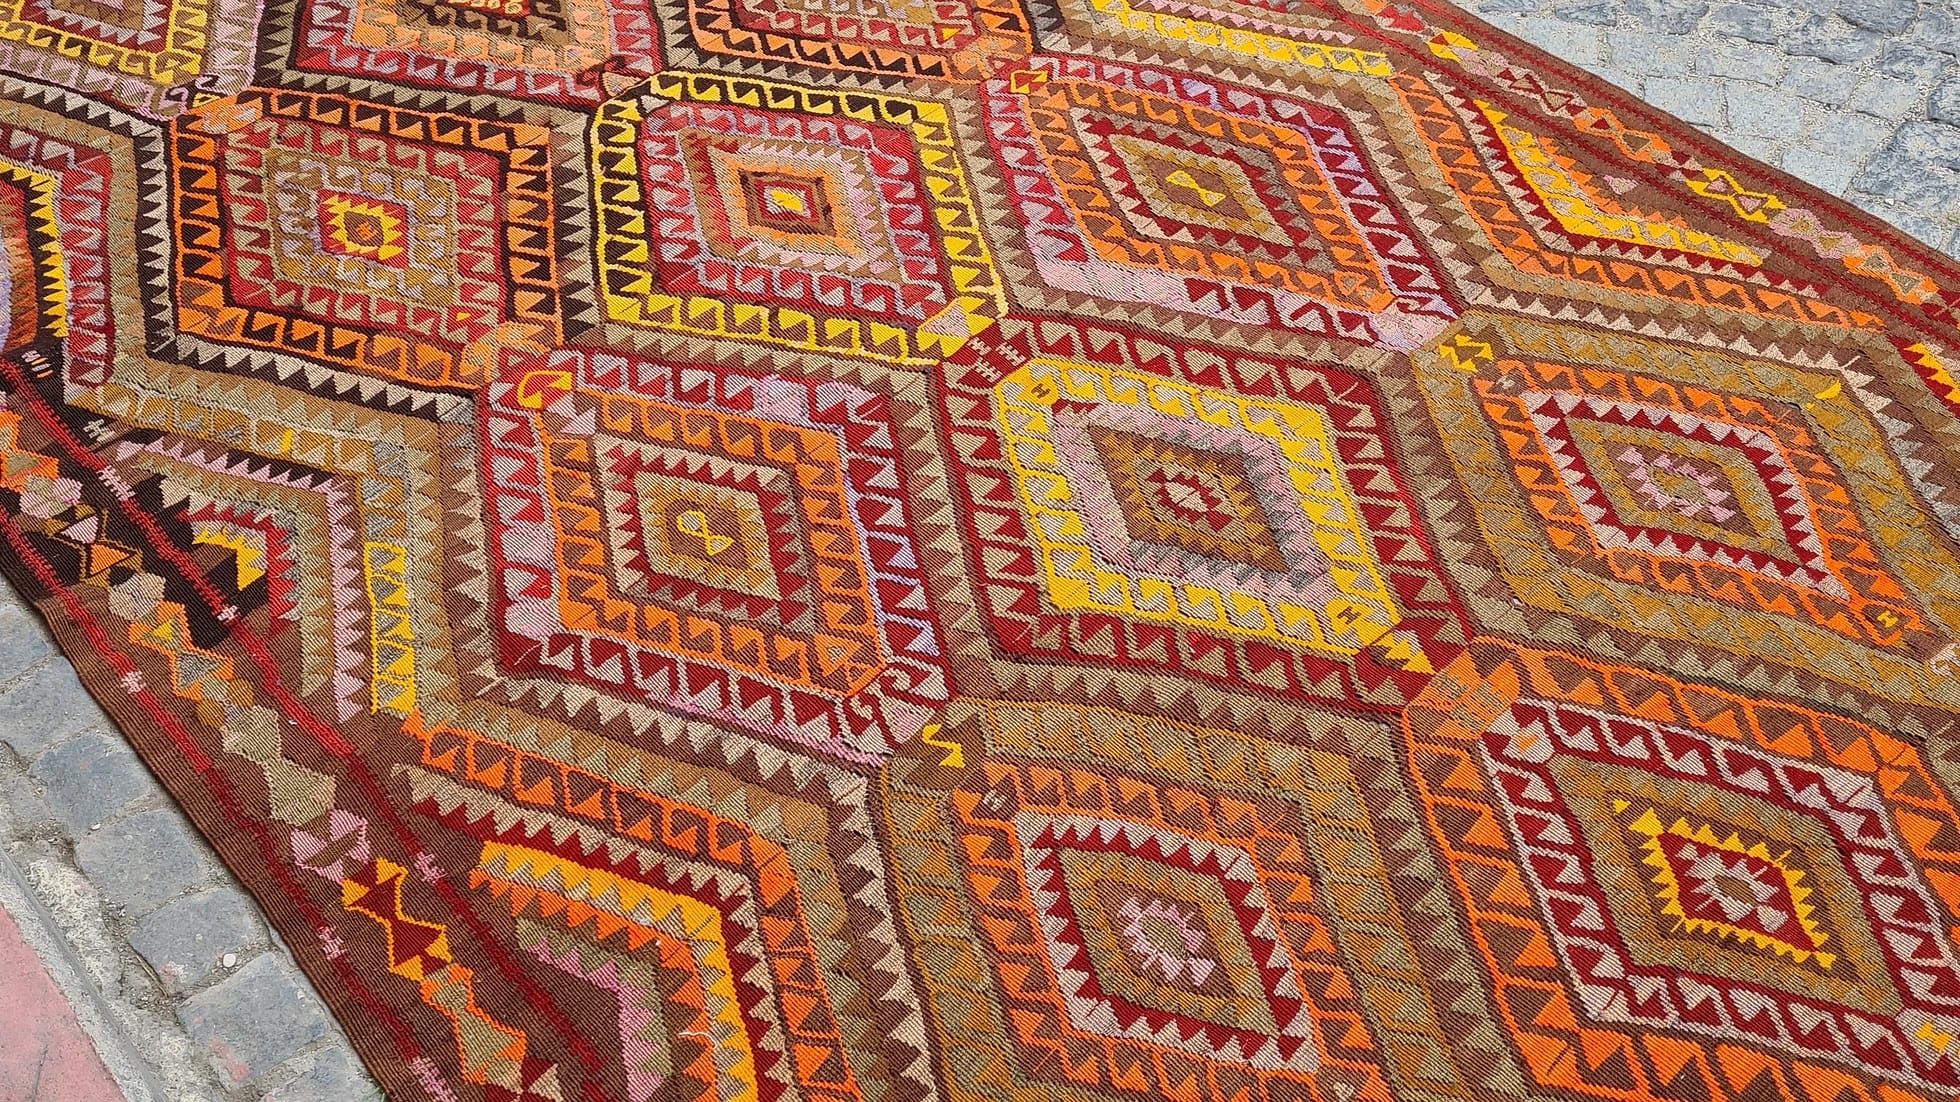 vintage handcrafted turkish tribal rug in yoruk style in saffron yellow and bronze orange from mid-century